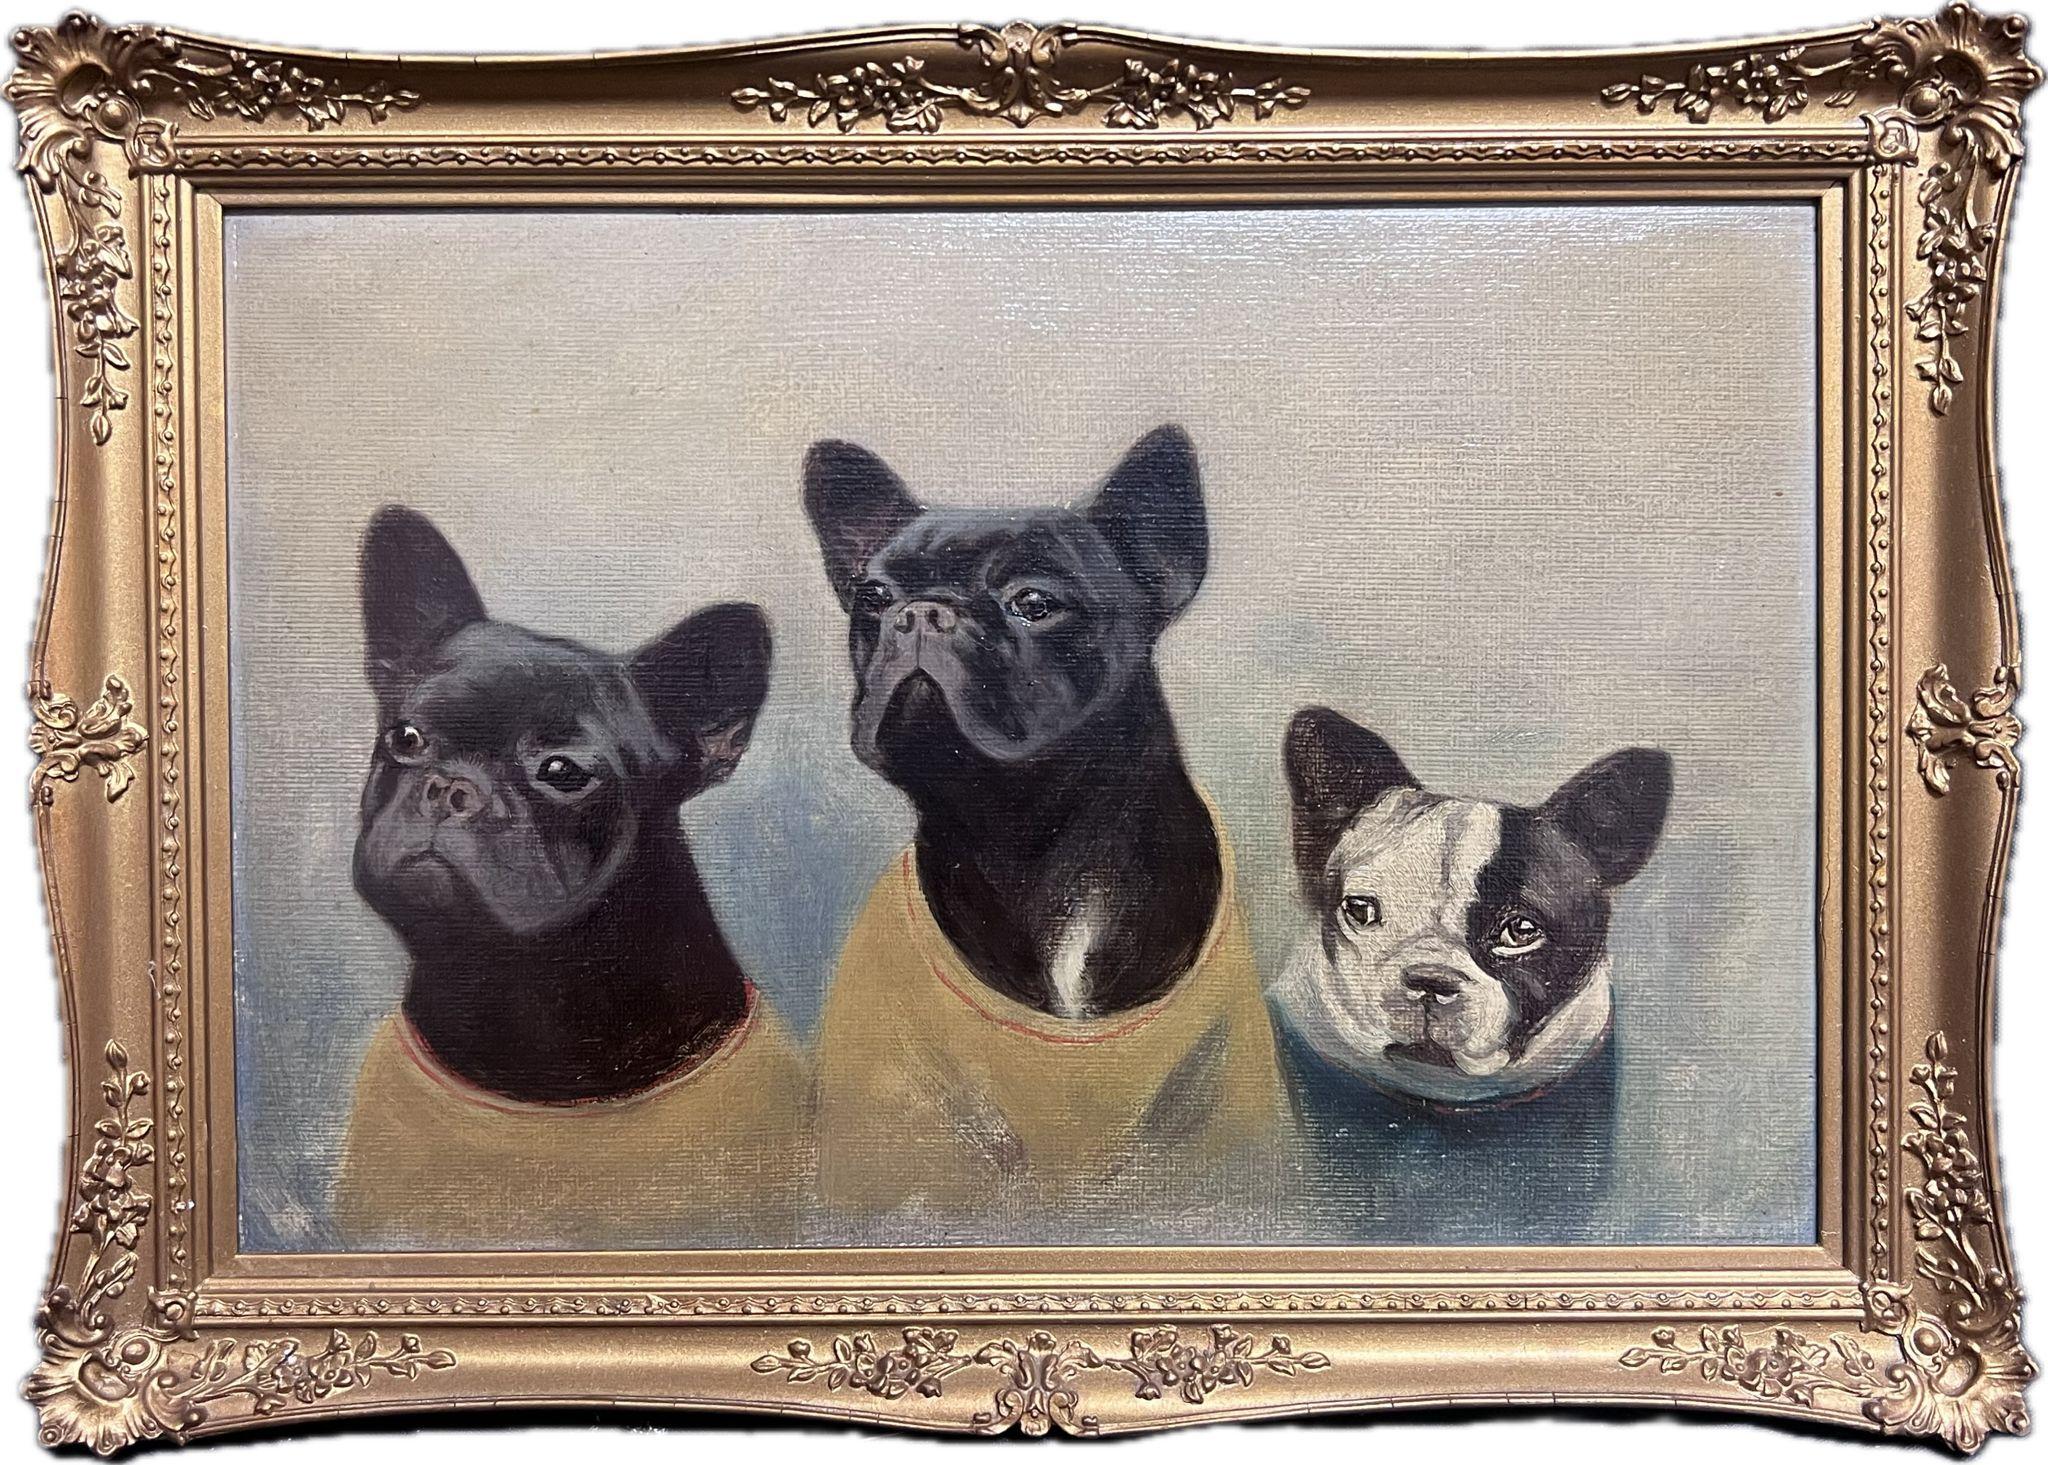 English dog artist Animal Painting - Boston Terrier Dogs Antique English Oil Painting in Gilt Frame